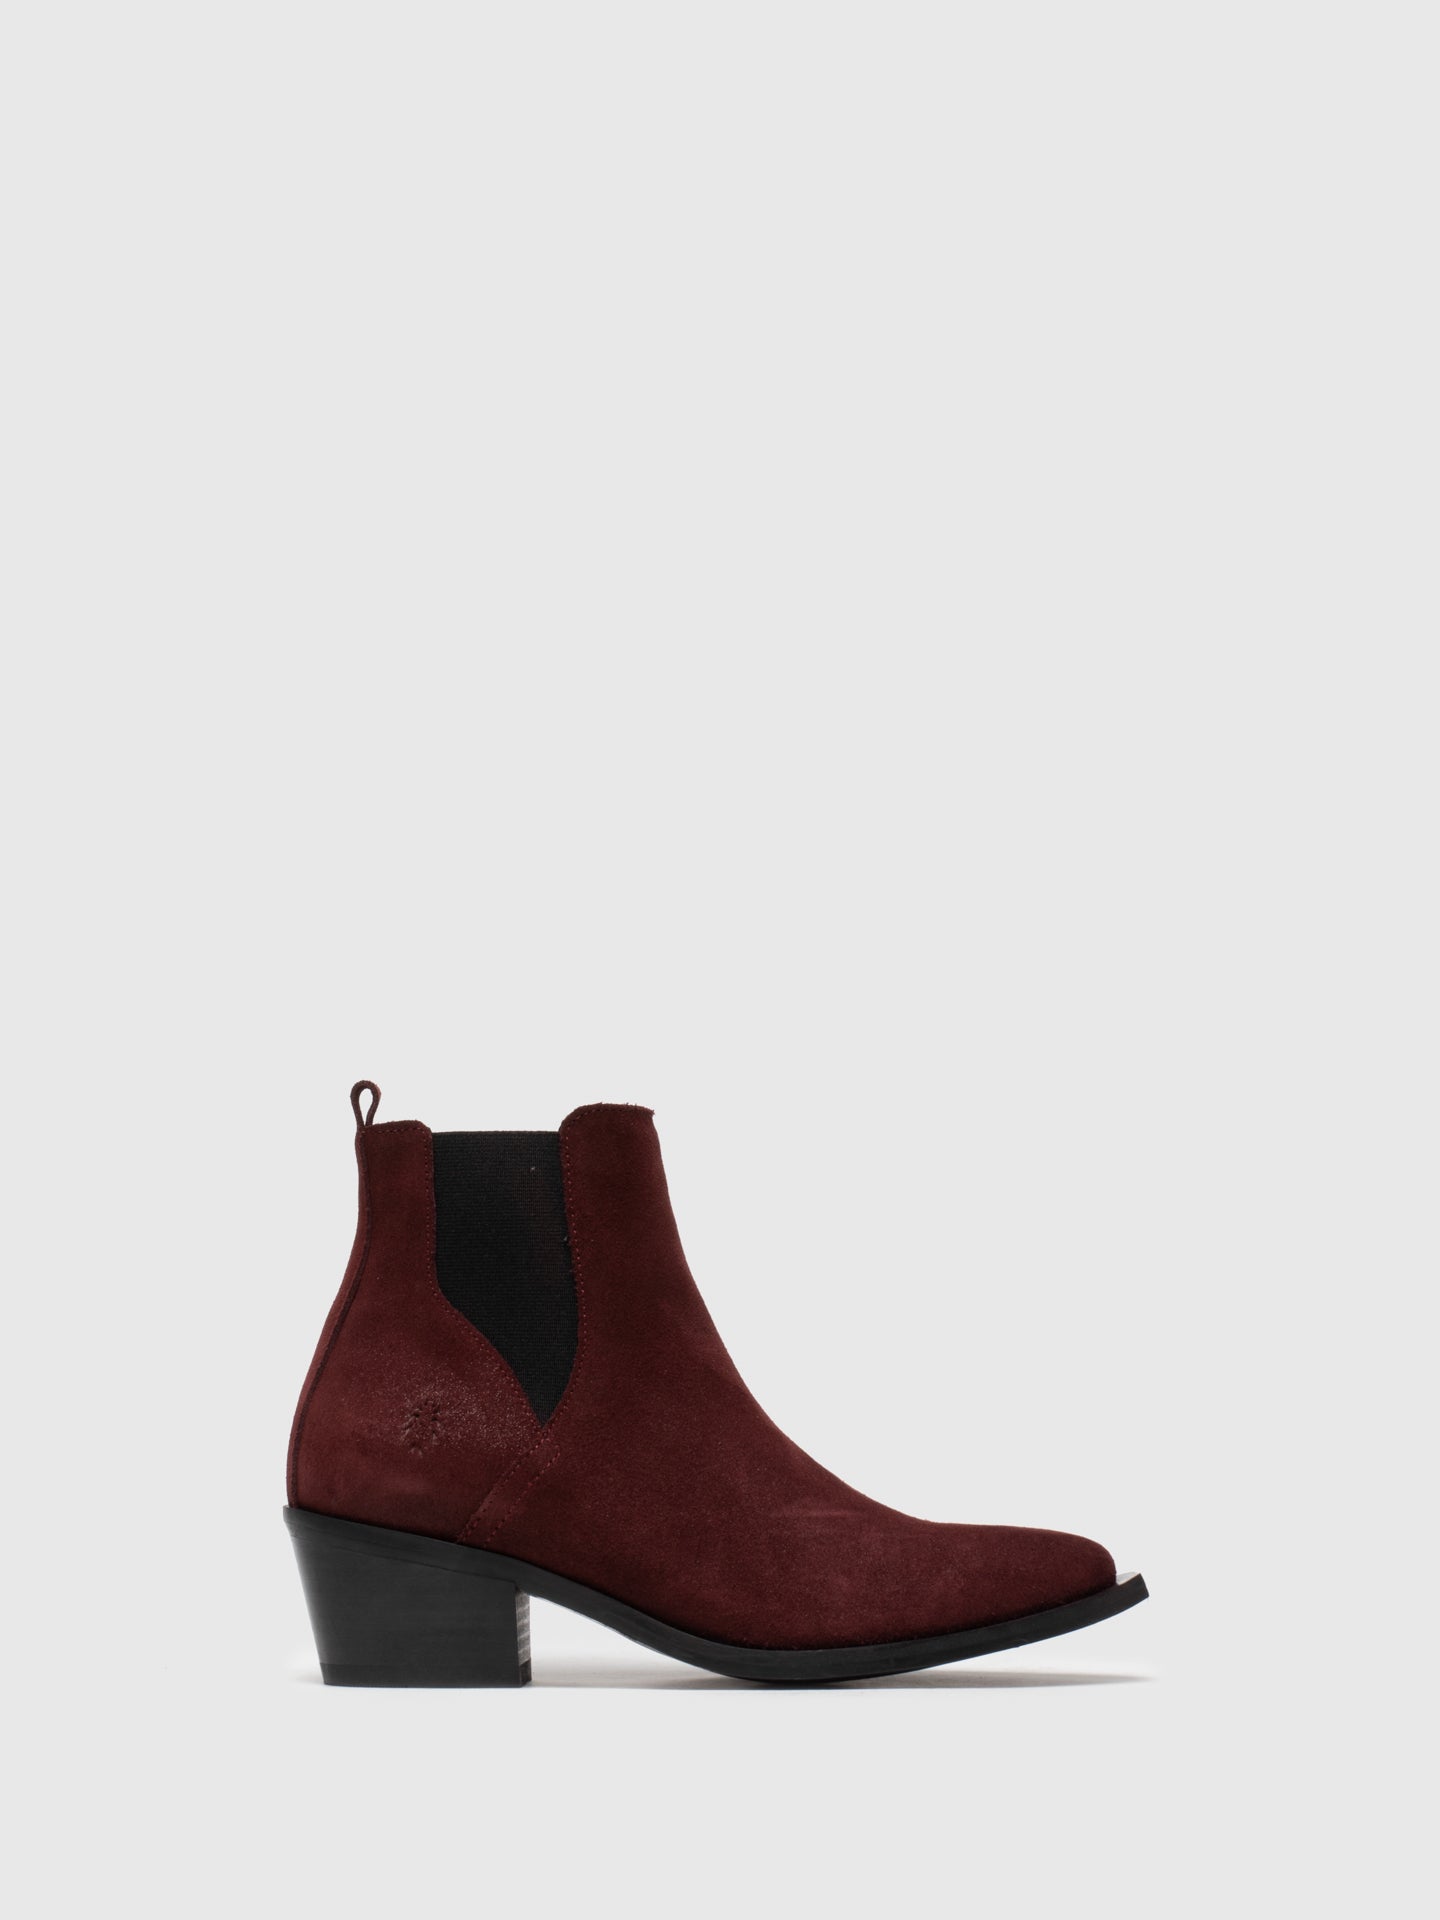 Fly London DarkRed Chelsea Ankle Boots